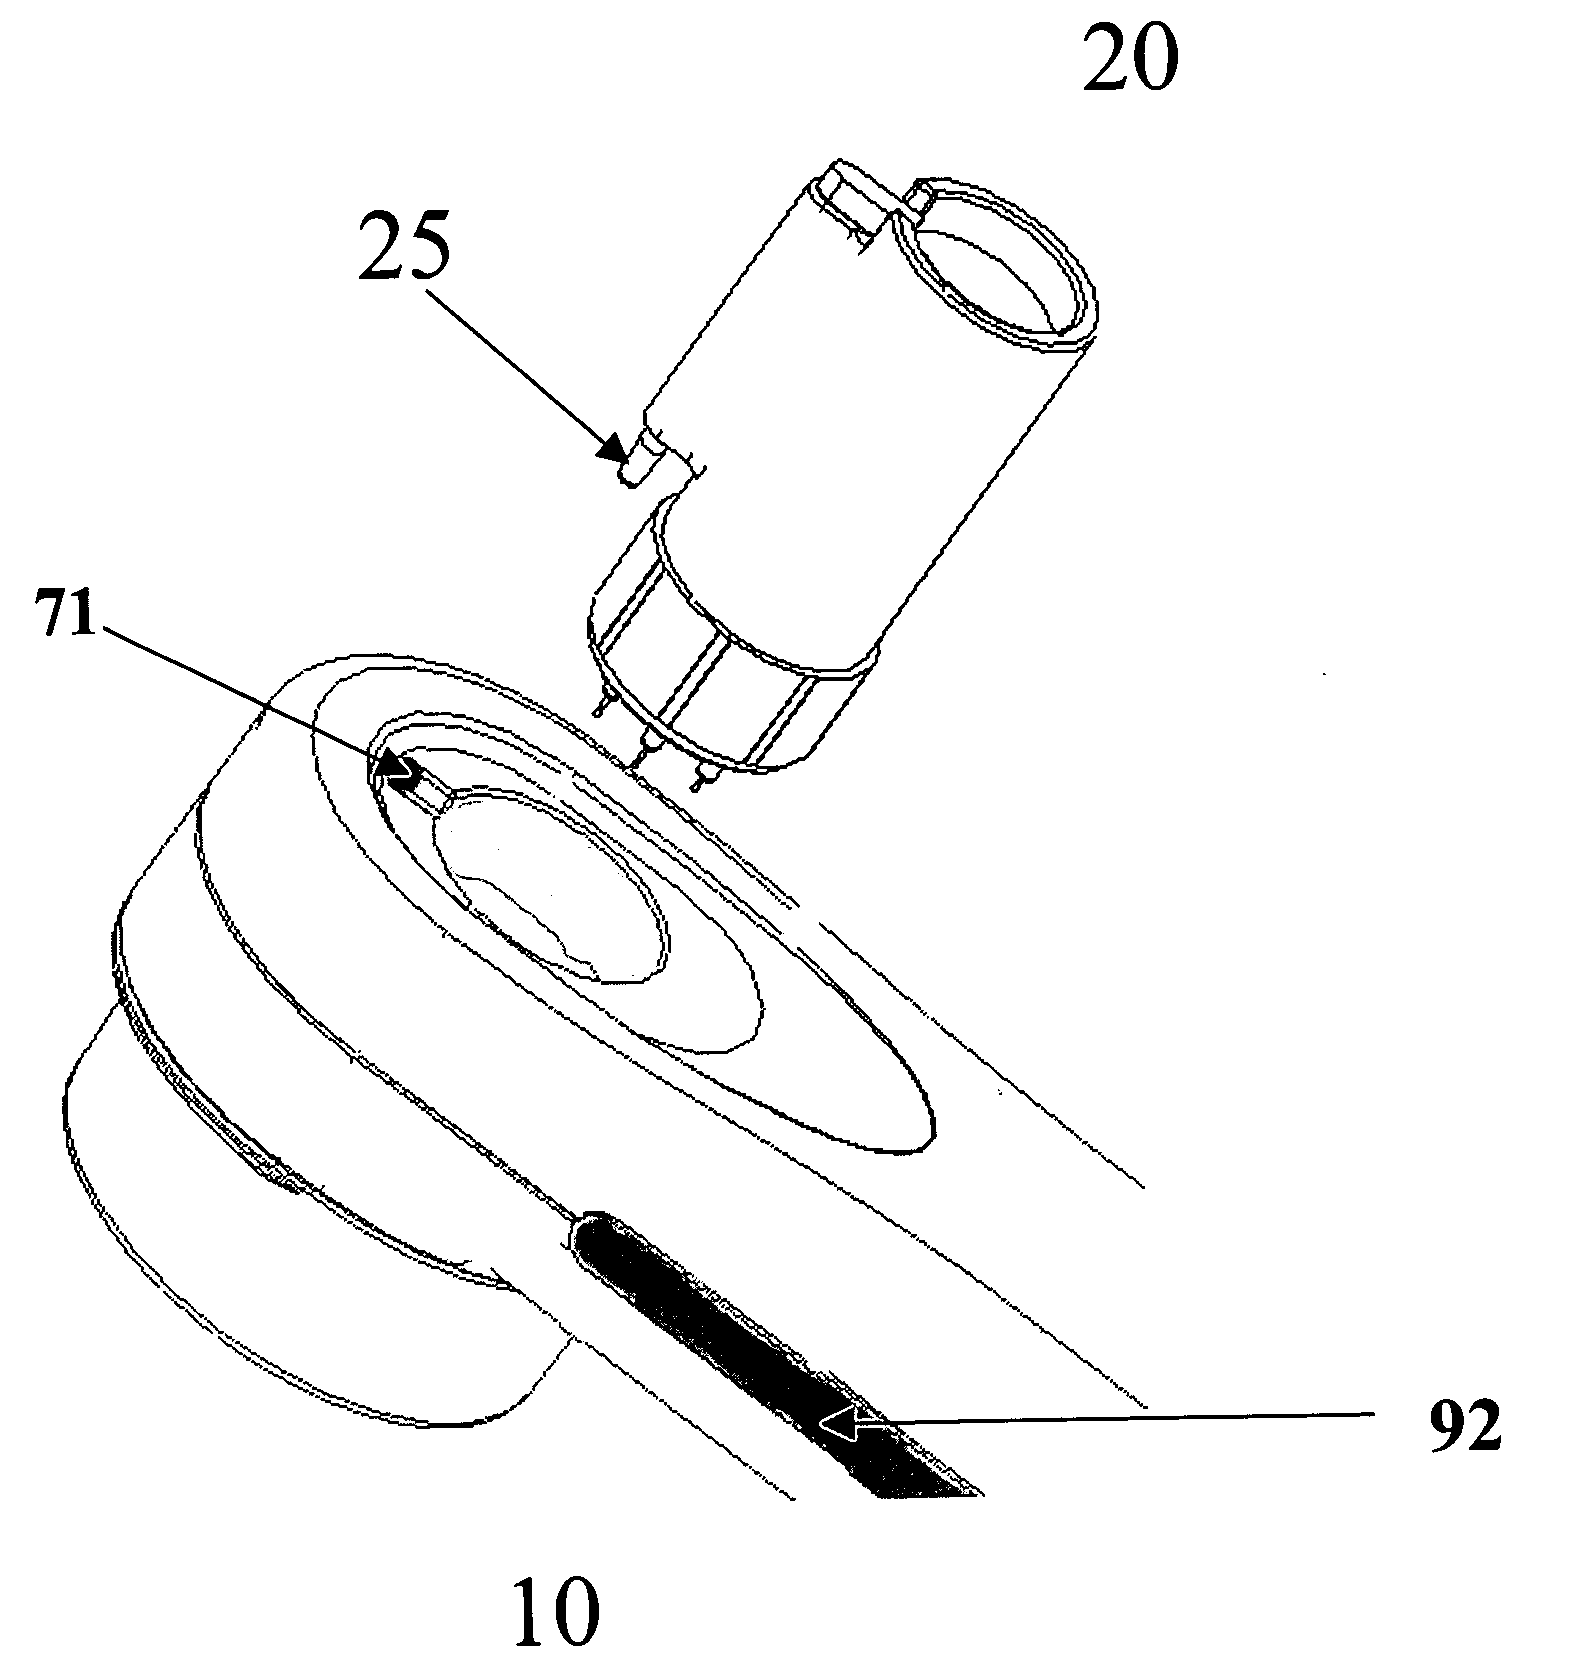 Replaceable electrostatically sprayable material reservoir design having electrostatic spraying and method for using same